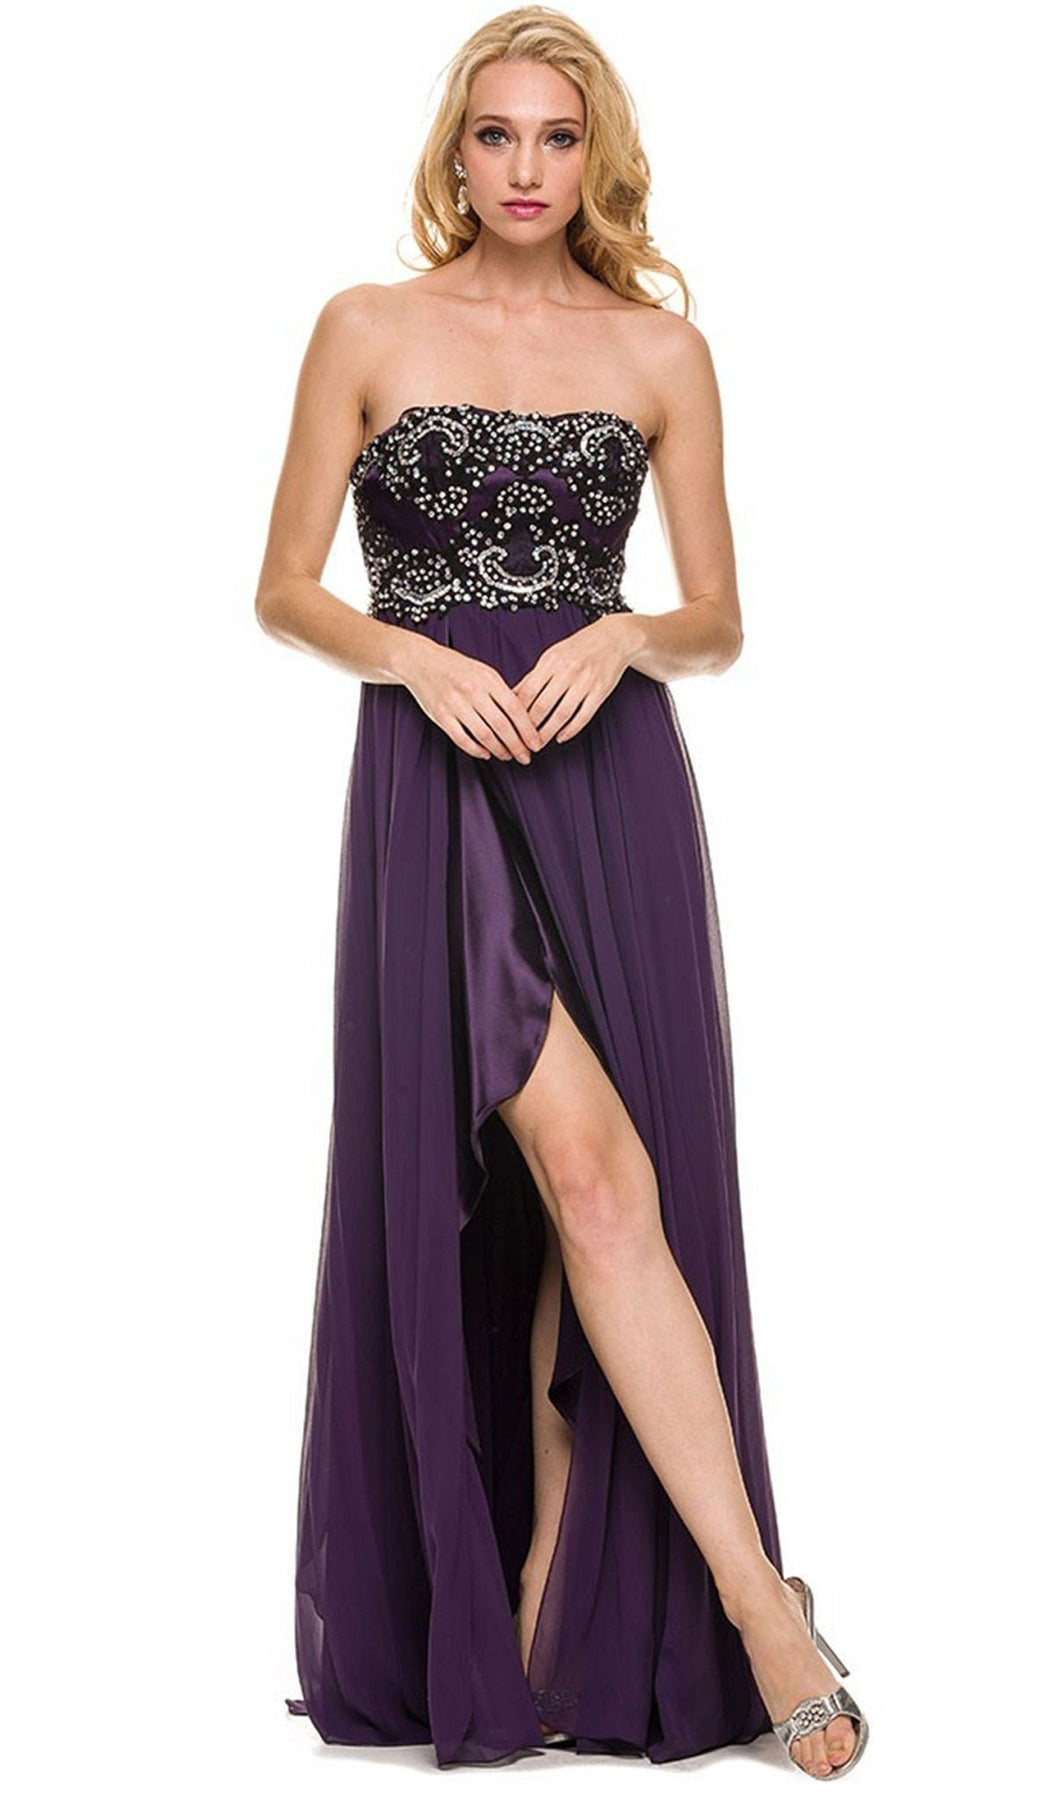 Nox Anabel - 2554 Embellished Semi-Sweetheart A-line Dress Special Occasion Dress XS / Plum